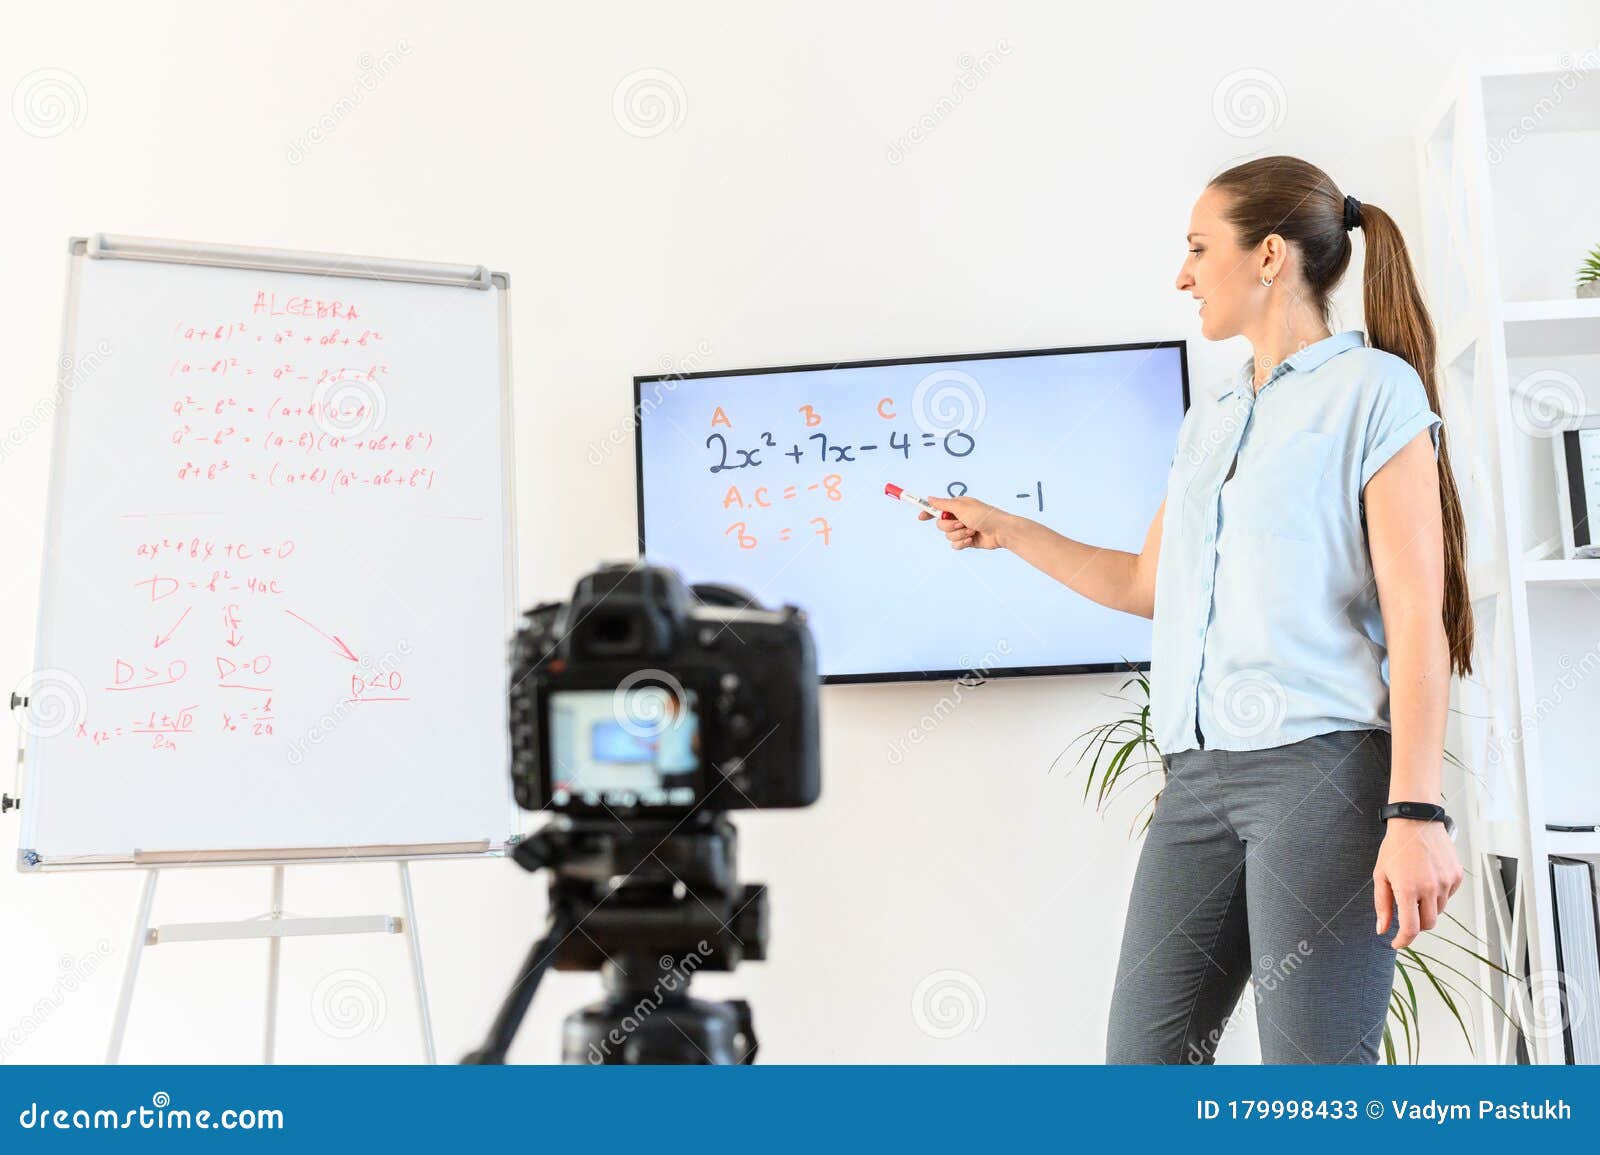 female teacher is recording classes on a camera, she stands near flip chart and screen with a marker in hand, camera in foreground